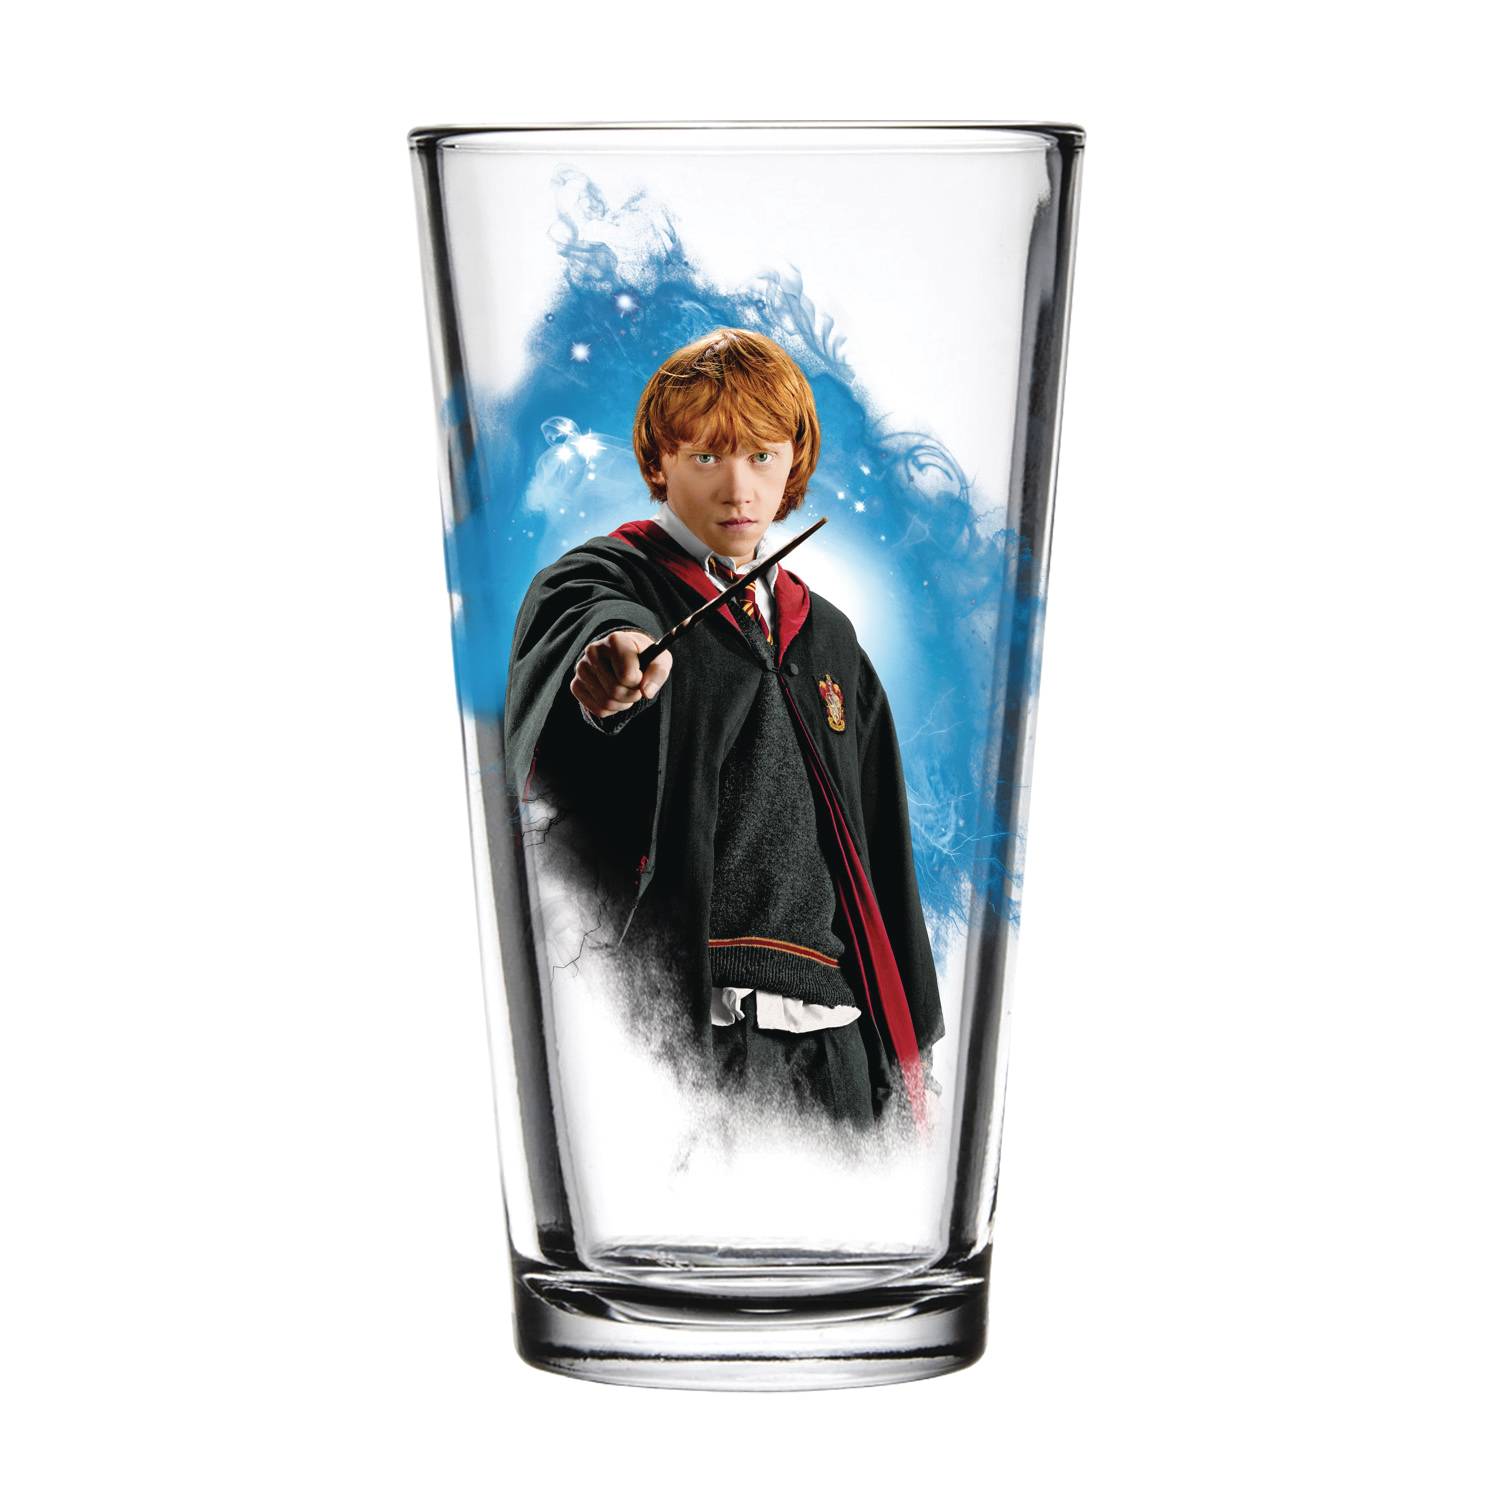 TOON TUMBLERS HARRY POTTER MOVIE RON WEASLEY PINT GLASS